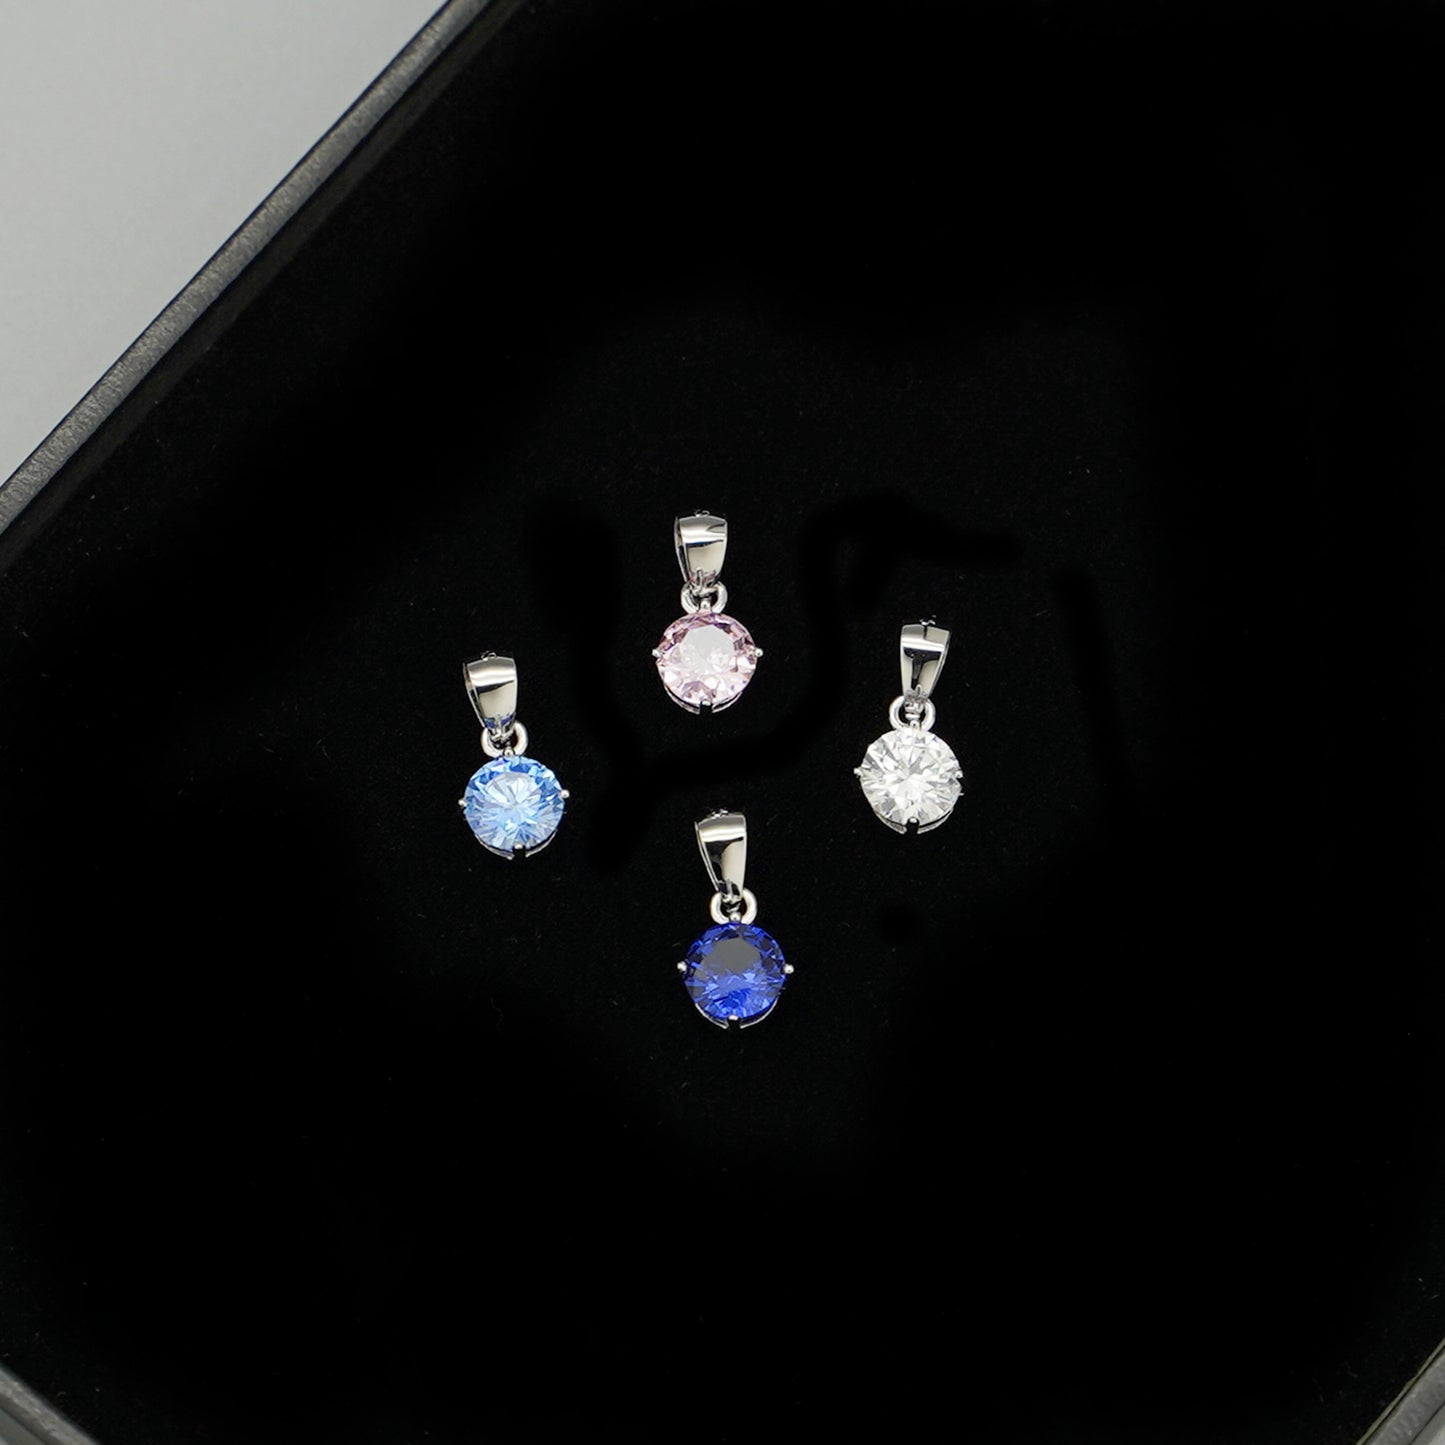 4-Colour Cubic Zirconia Pendant Necklace in Sterling Silver